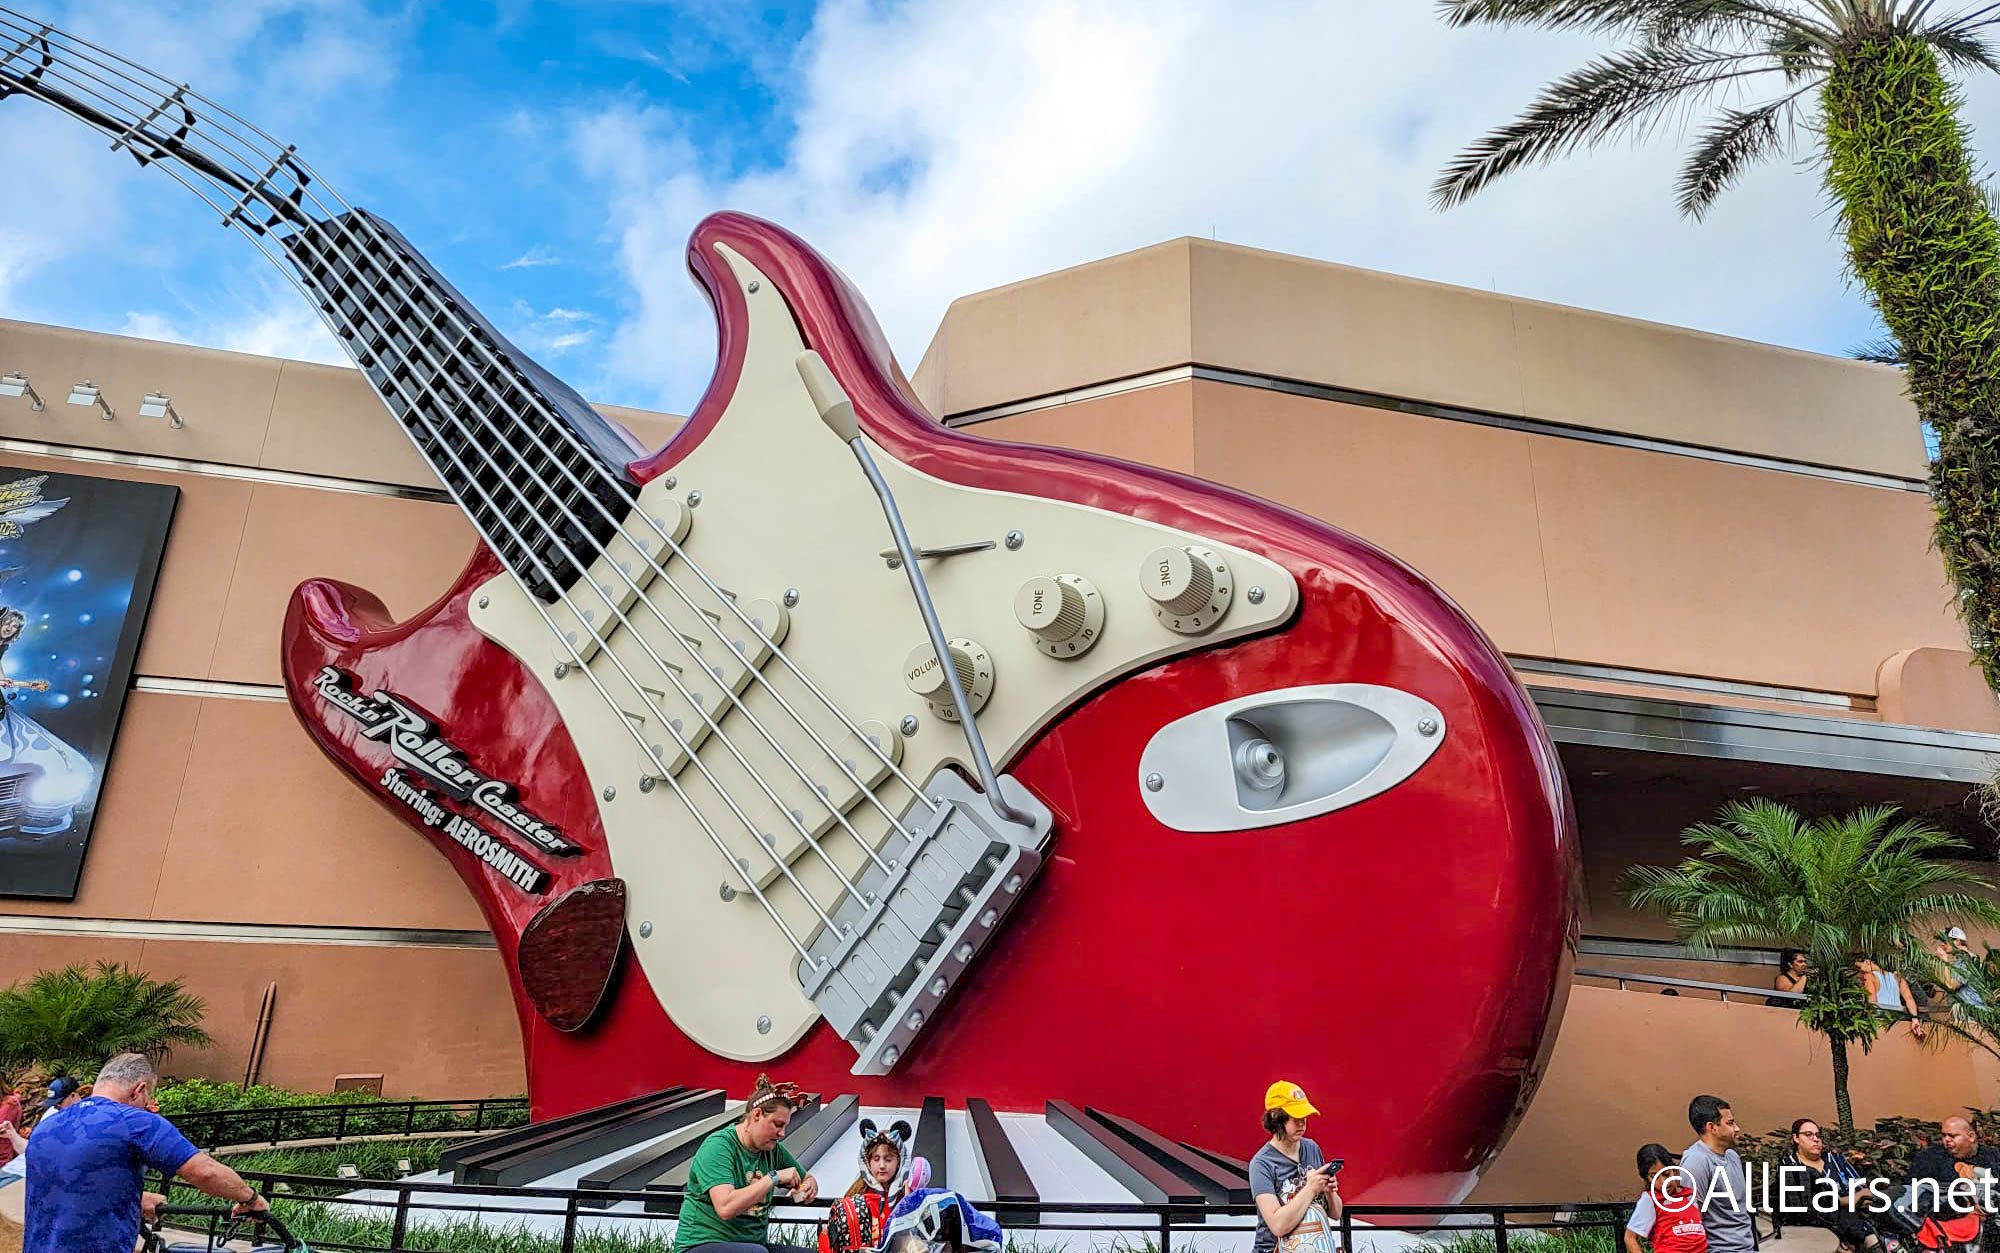 The PROBLEM You Should Expect at Rock 'n' Roller Coaster in Disney World 